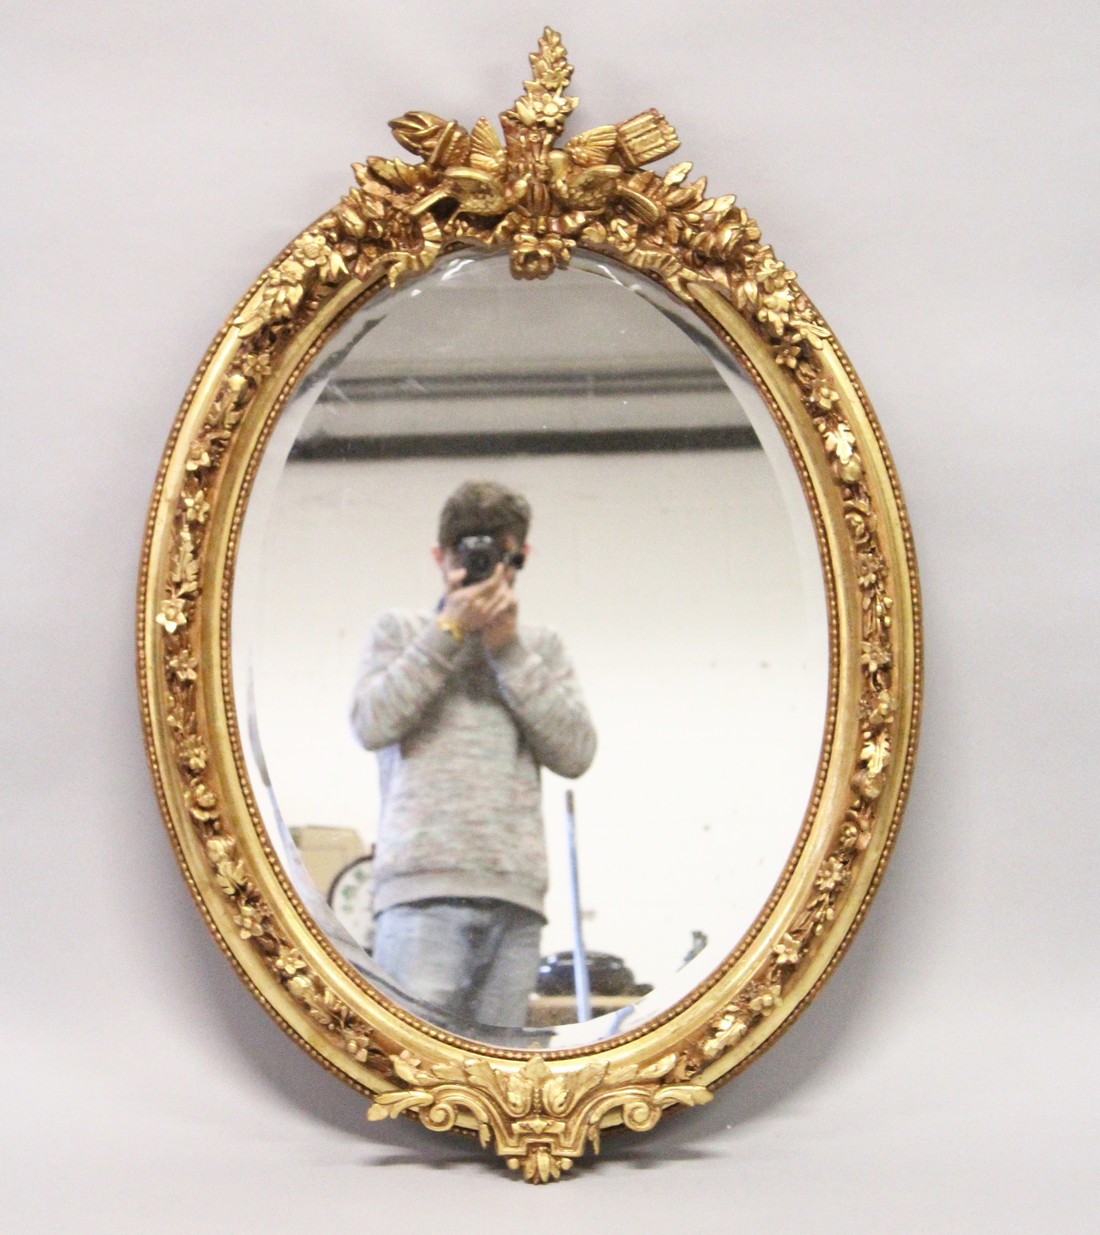 A DECORATIVE GILT FRAMED OVAL WALL MIRROR 3ft 7ins high x 2ft 6ins wide - Image 2 of 5